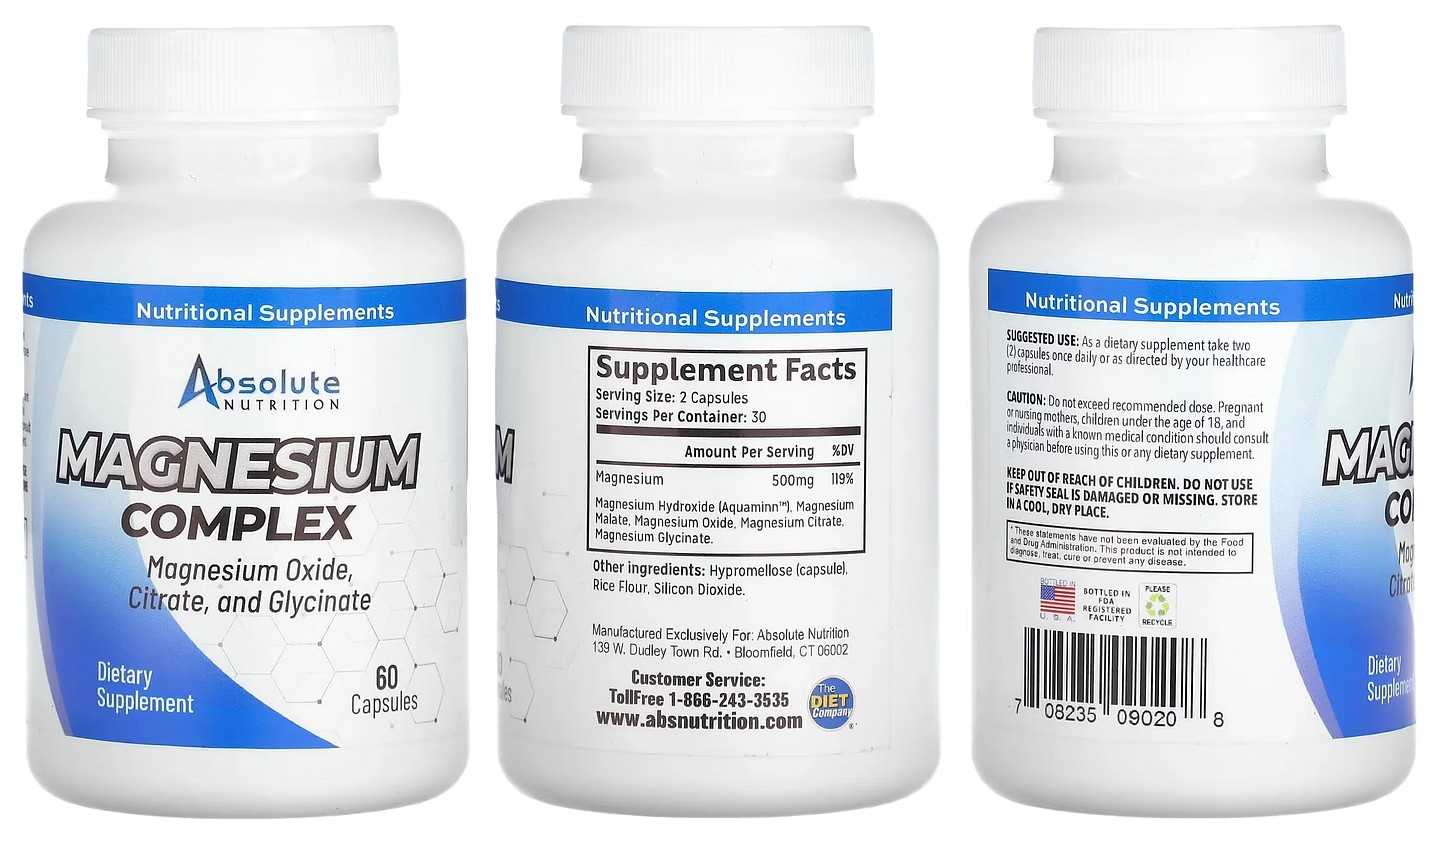 Absolute Nutrition, Magnesium Complex packaging